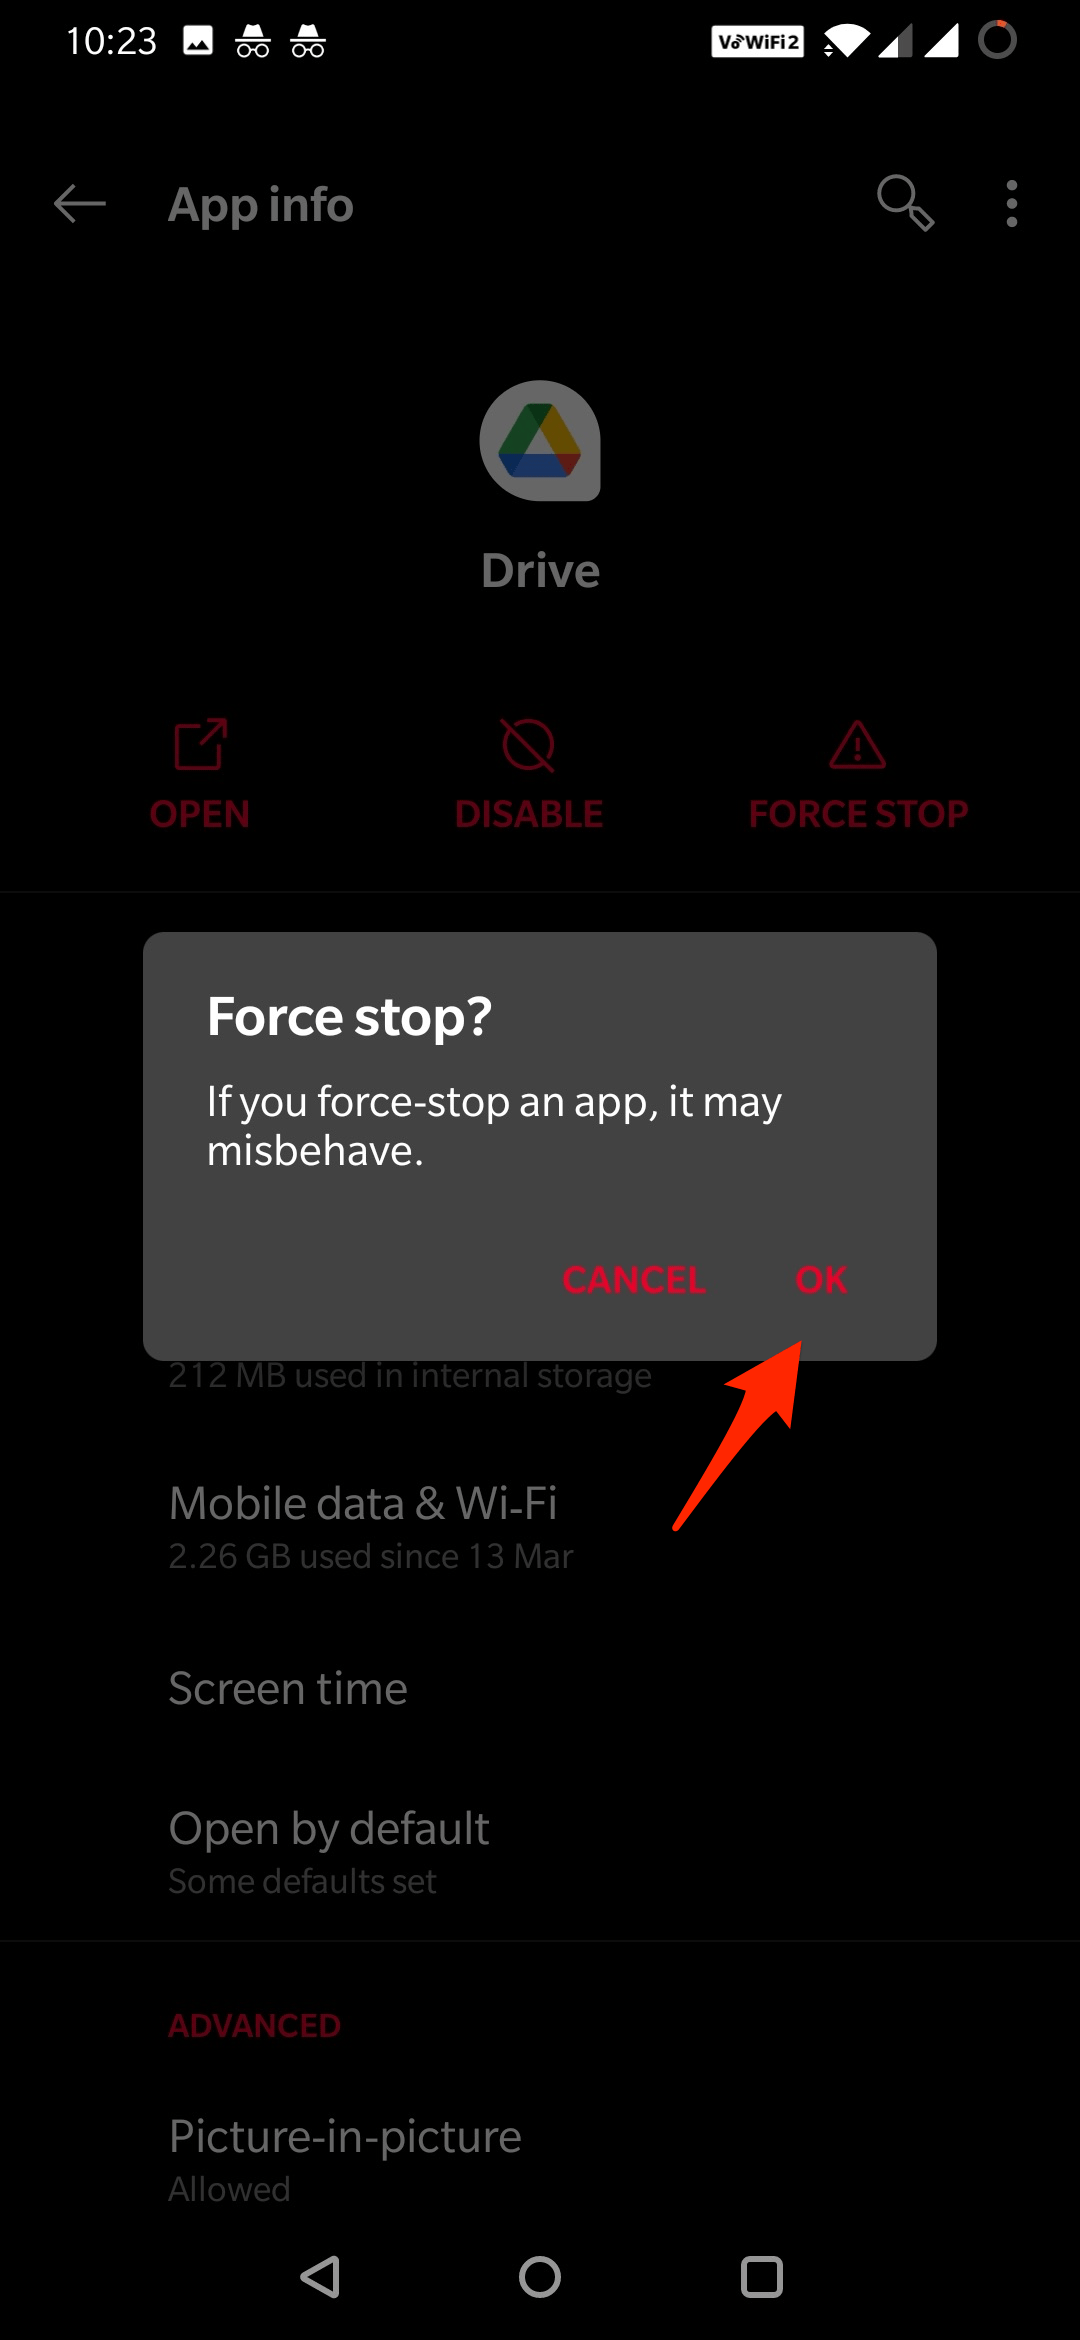 Confirm_Force_Stop